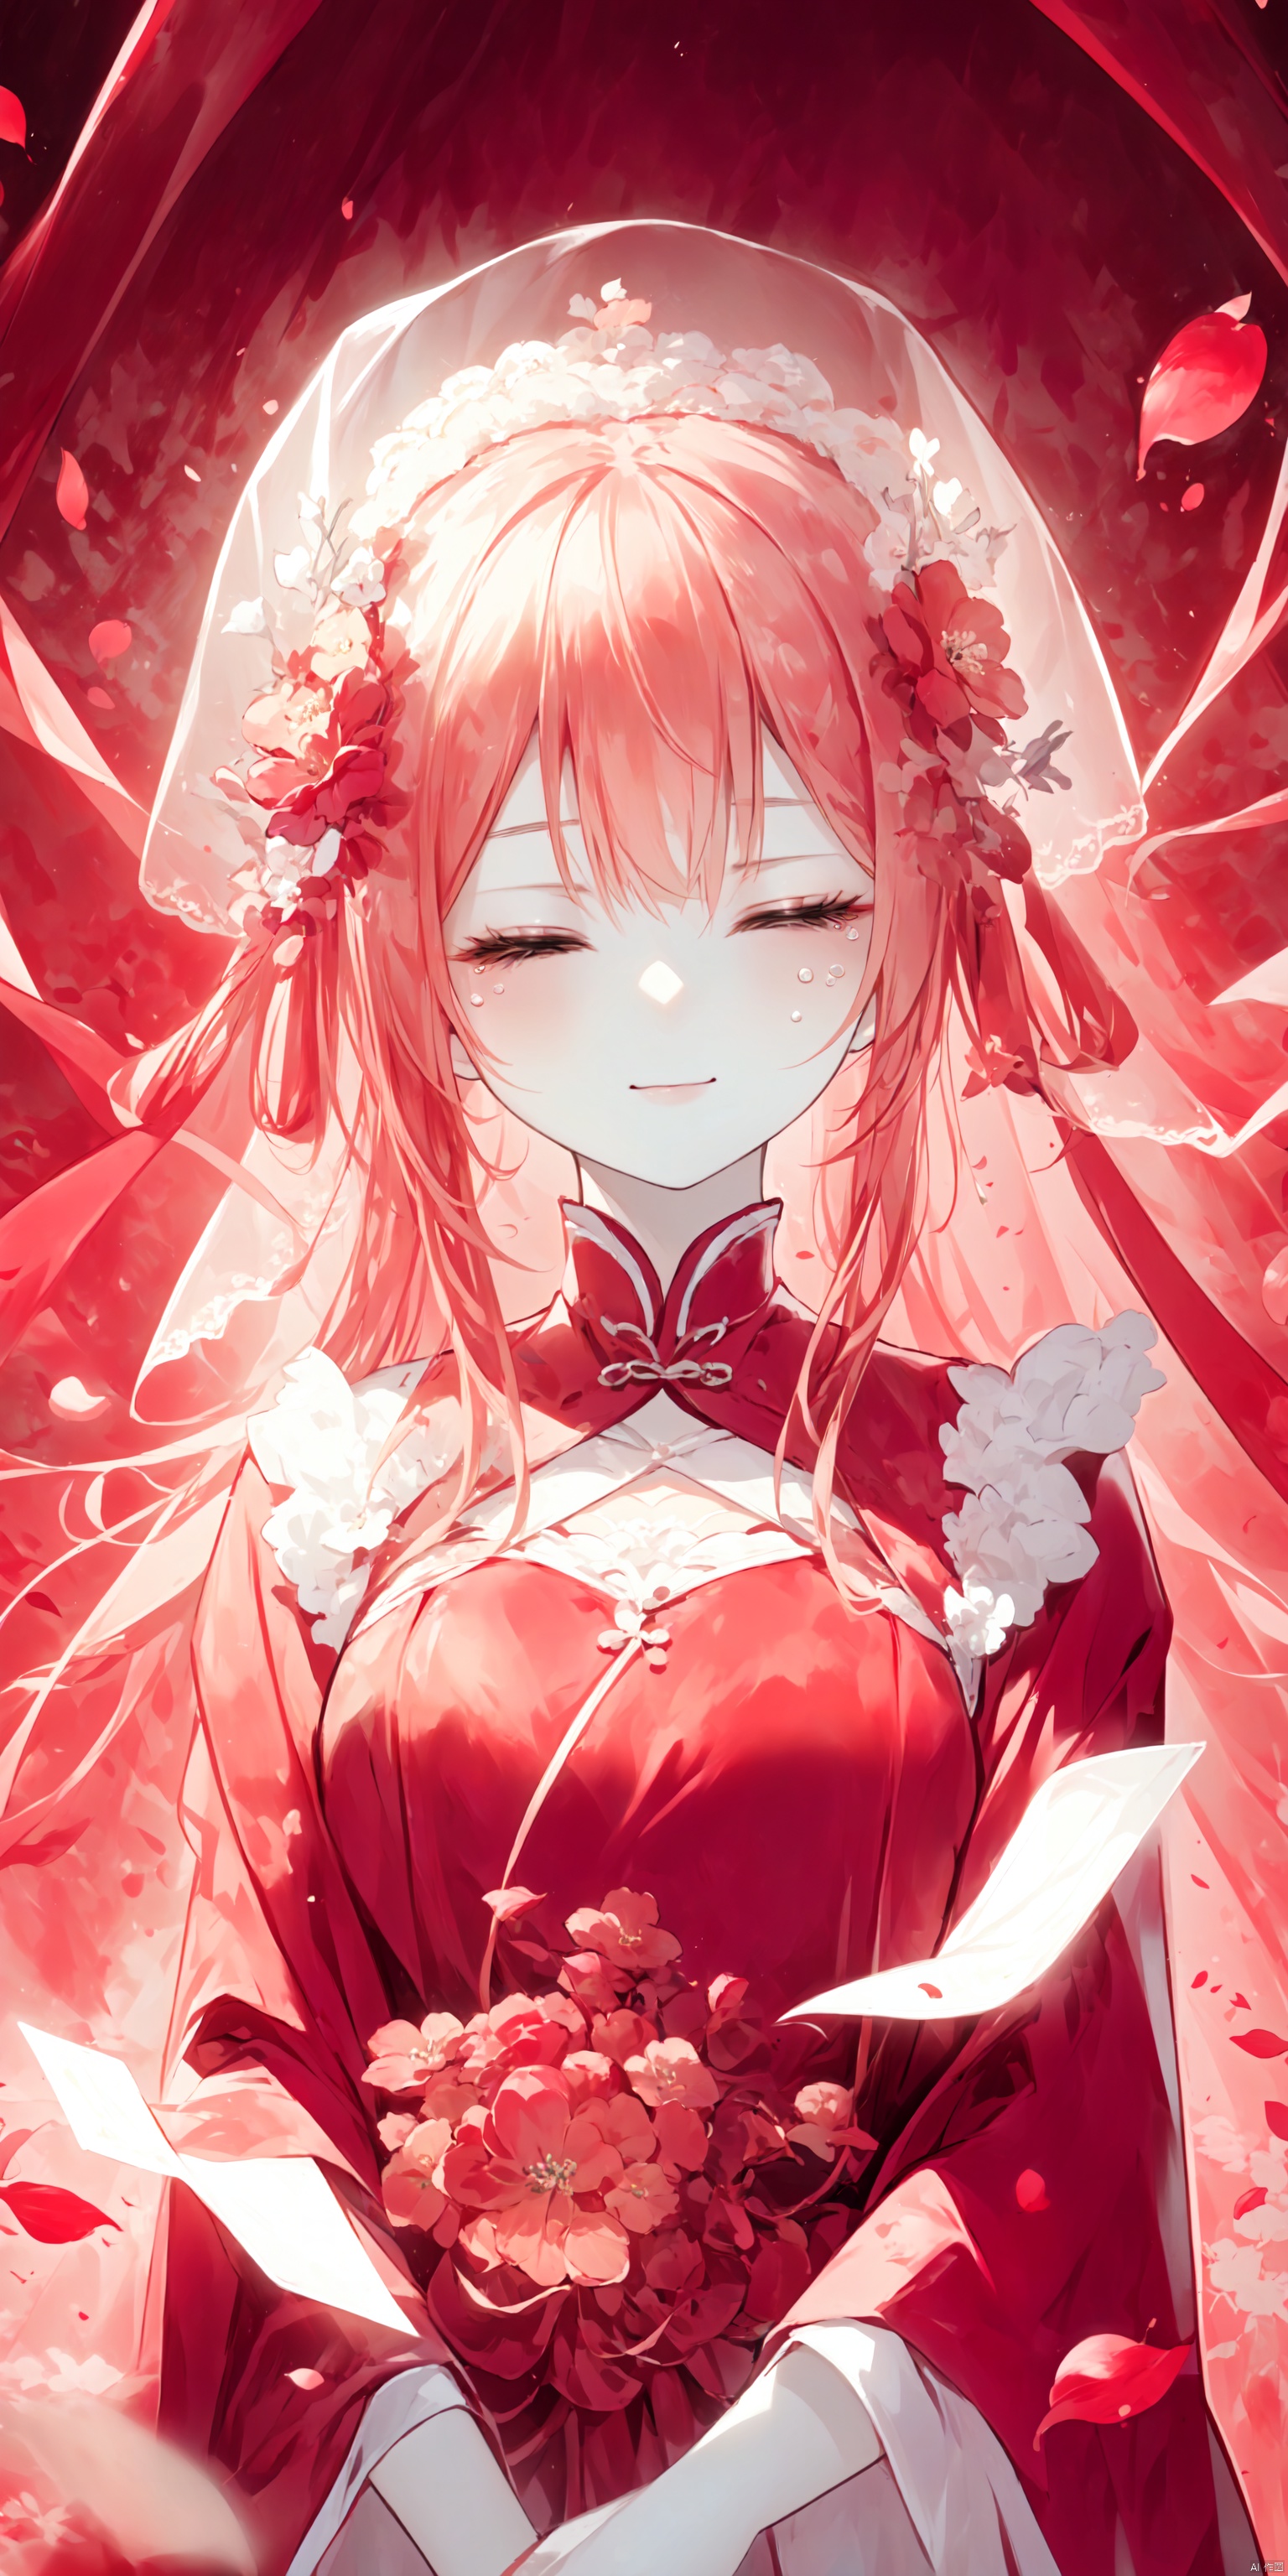  girl1girl, long hair, solo, veil, flower, closed eyes, dress, smile, wedding dress, hair ornament, petals, dated, ribbon, tears, bouquet, bridal veil, signature, hair flower, red hair, crying, white background, pink hair, upper body, masterpiece, top quality, horror, theme, masterpiece, masterpiece, top quality, no humans, scenery, red theme, night, Ylvi-Tattoos, horror, theme, Tombstone, Grave, cute girl, Paper man, Paper dowry, Dowry, Bride of Horrors, Oni Shin Musume, Paper sedan chair, Sedan chair, horror, Demon Bride, The wedding dress is new, Bride's robe, Red wedding dress, Oni Shin Musume, Underworld wedding, The yin is strong, Ghost Love, It's not pure, The dead in vain, The heart is restless, Lonely and cold in the month before the grave, The cemetery is grass-colored and tear-stained, The dusty past is like smoke, There was no end to the sigh of sorrow, White wedding dress, best quality, best quality,,(masterpiece, top quality, best quality),horror (theme),
masterpiece,(masterpiece, top quality, best quality, ((no humans)), scenery, red theme, night, Ylvi-Tattoos, horror (theme),Tombstone, Grave, cute girl, (\shuang hua\), purdress, hanfu, backlight, Chinese weddingdress, Dragon and girl, chineseclothes, hydress-hair ornaments